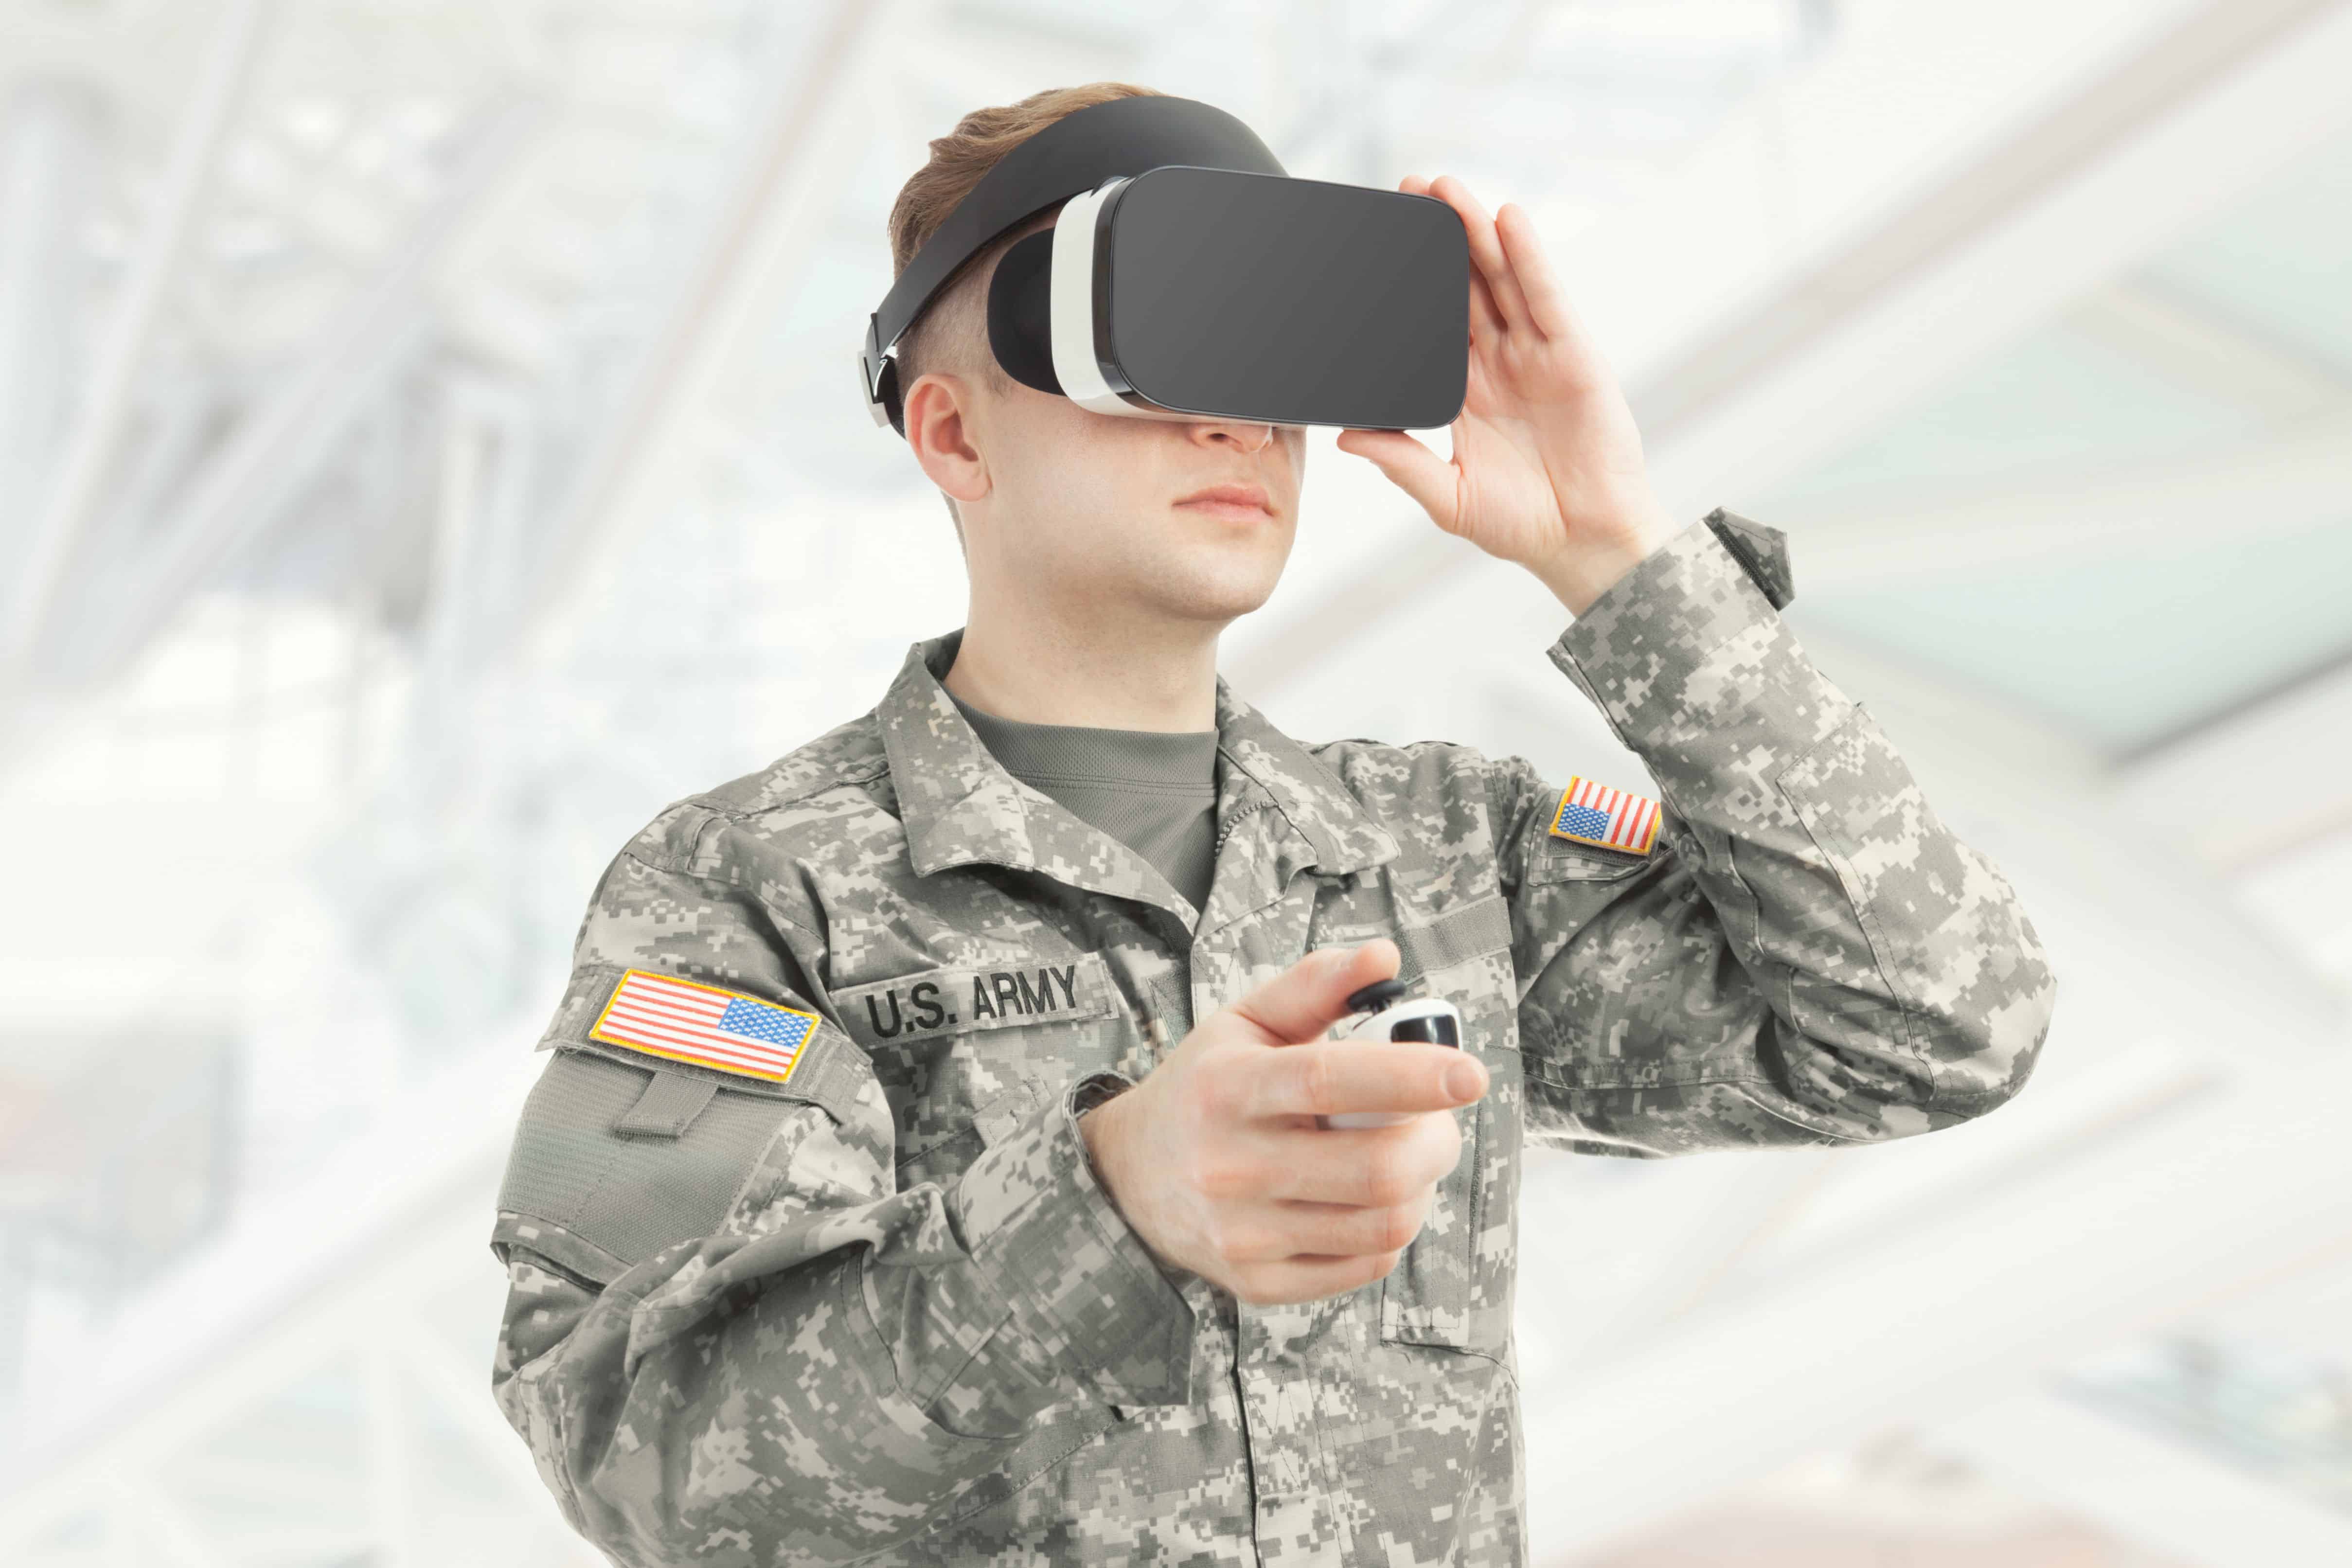 Indoors shot of American soldier wearing virtual reality glasses